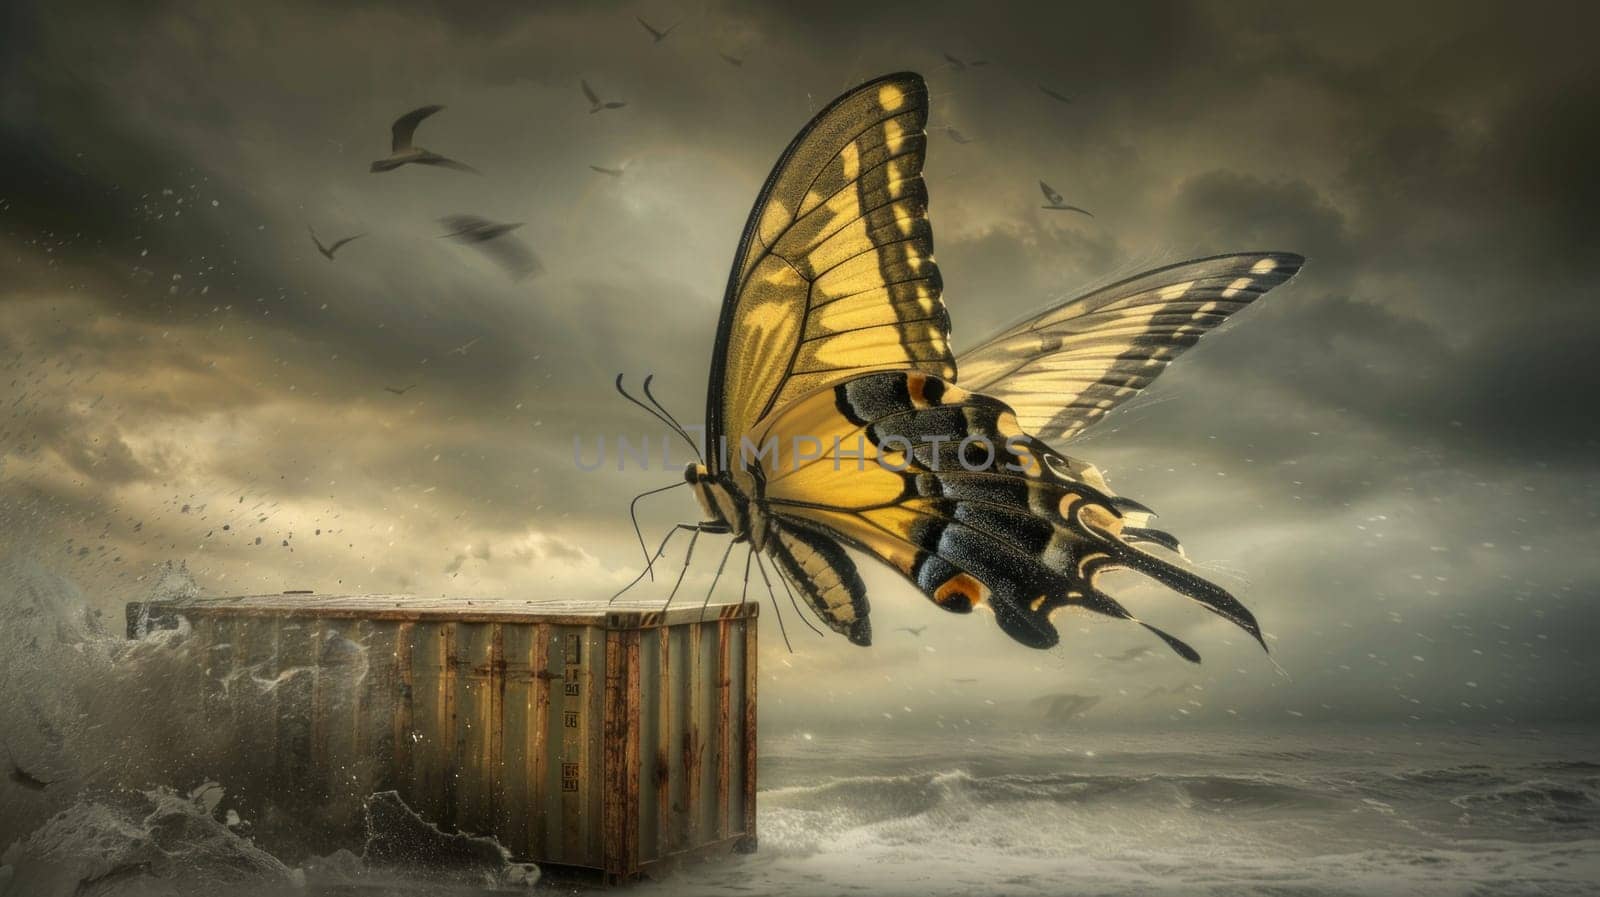 A delicate butterfly gracefully hovers over a trash can floating in the ocean, contrasting the beauty of nature with man-made waste by but_photo